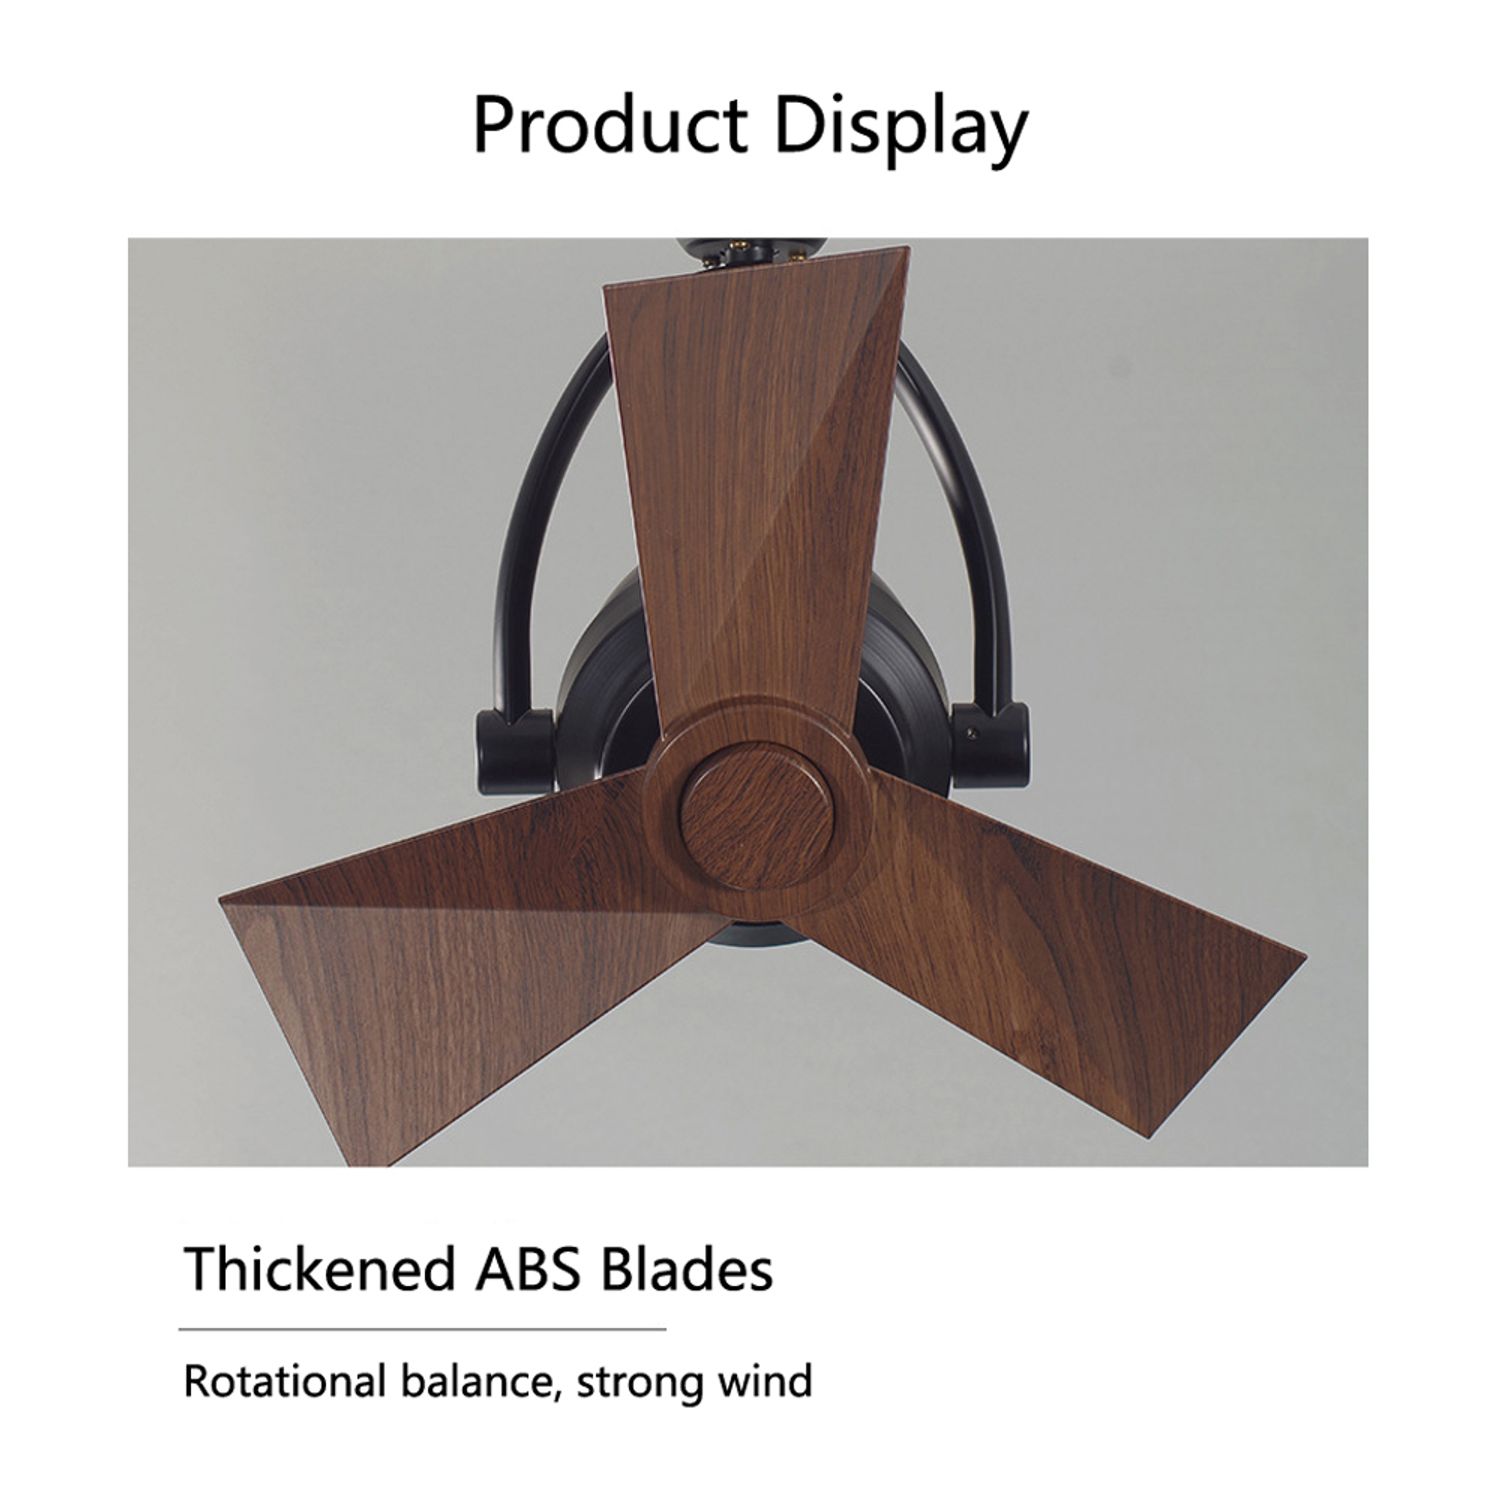 KBS small designer ceiling fan with thickened ABS blades